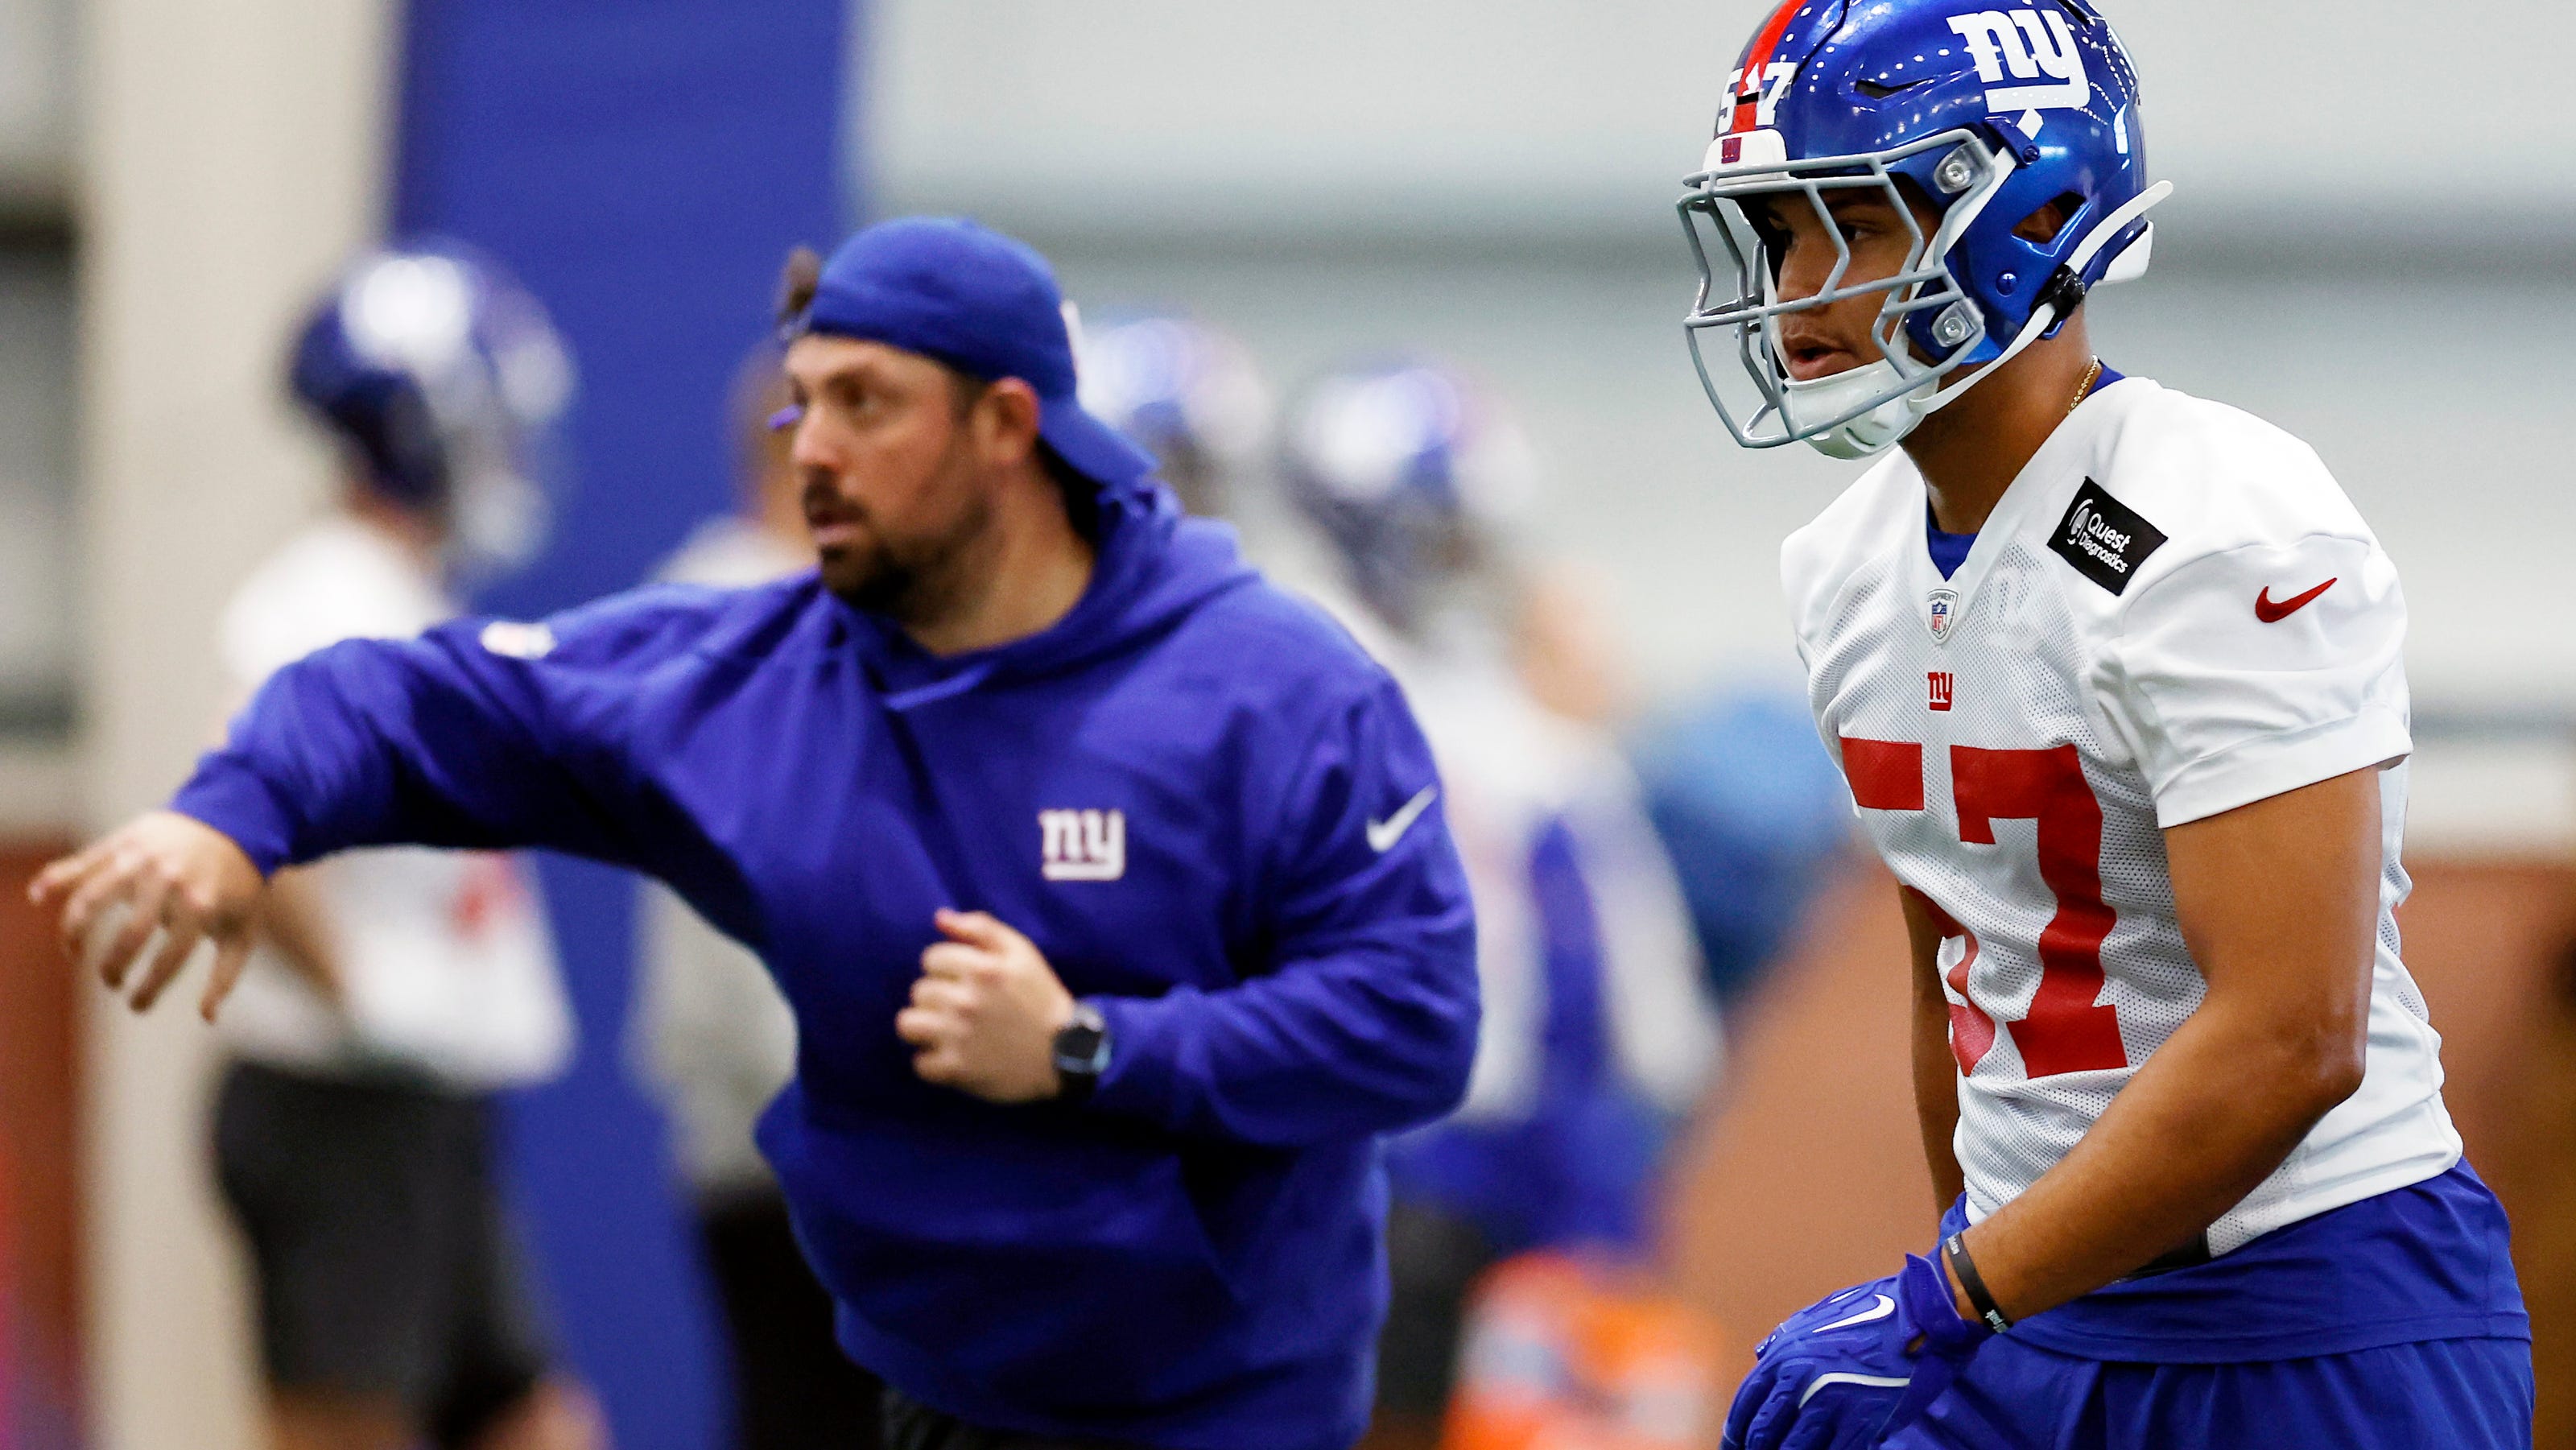 Giants' Darius Muasau says his 'alter ego' takes over on the field